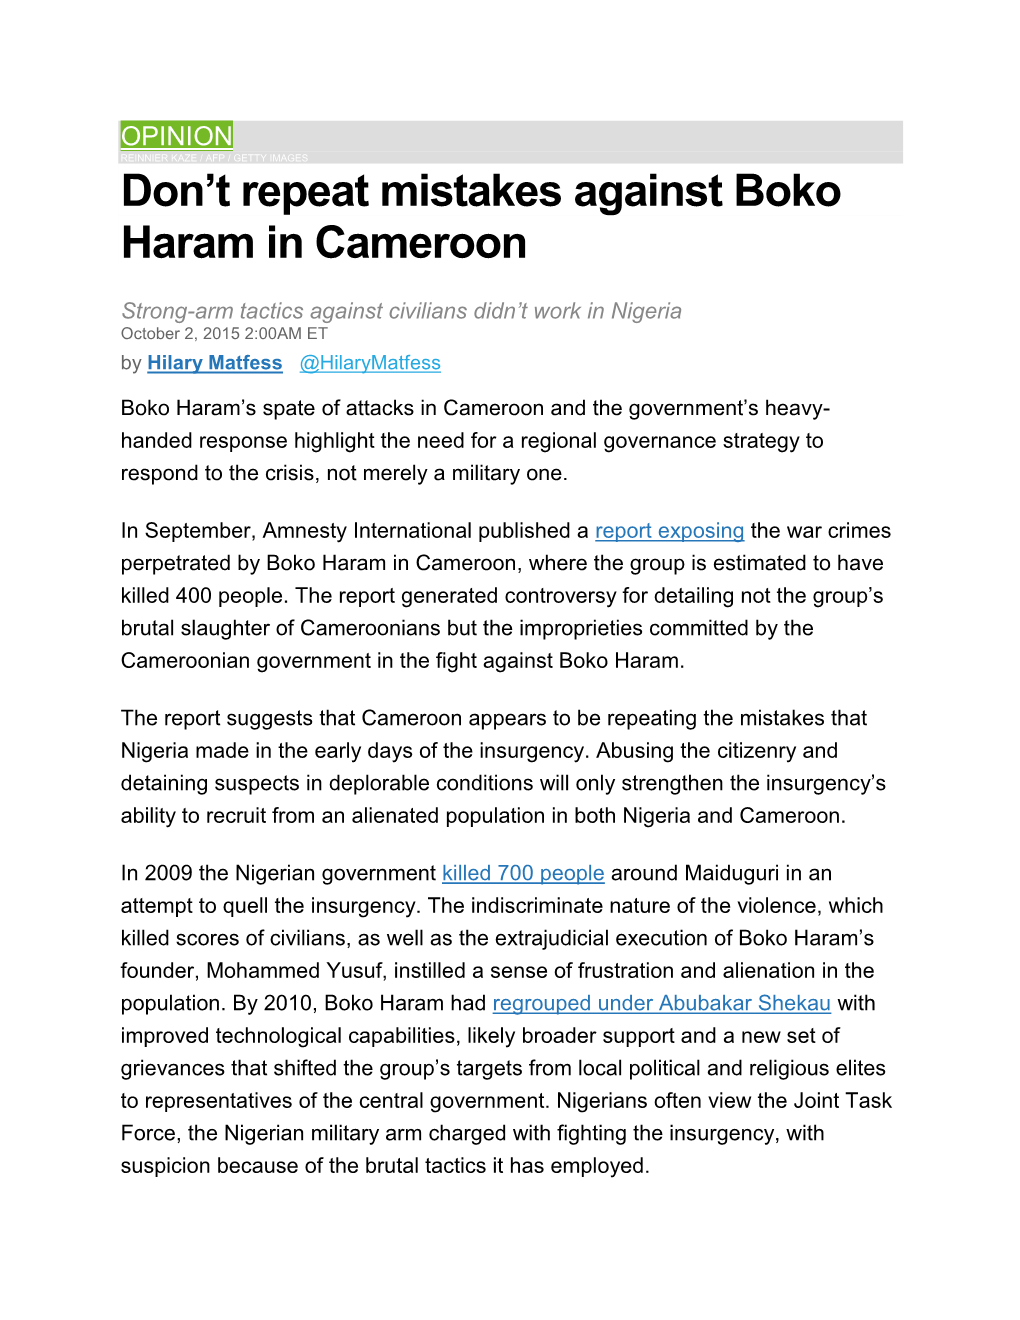 Don't Repeat Mistakes Against Boko Haram in Cameroon